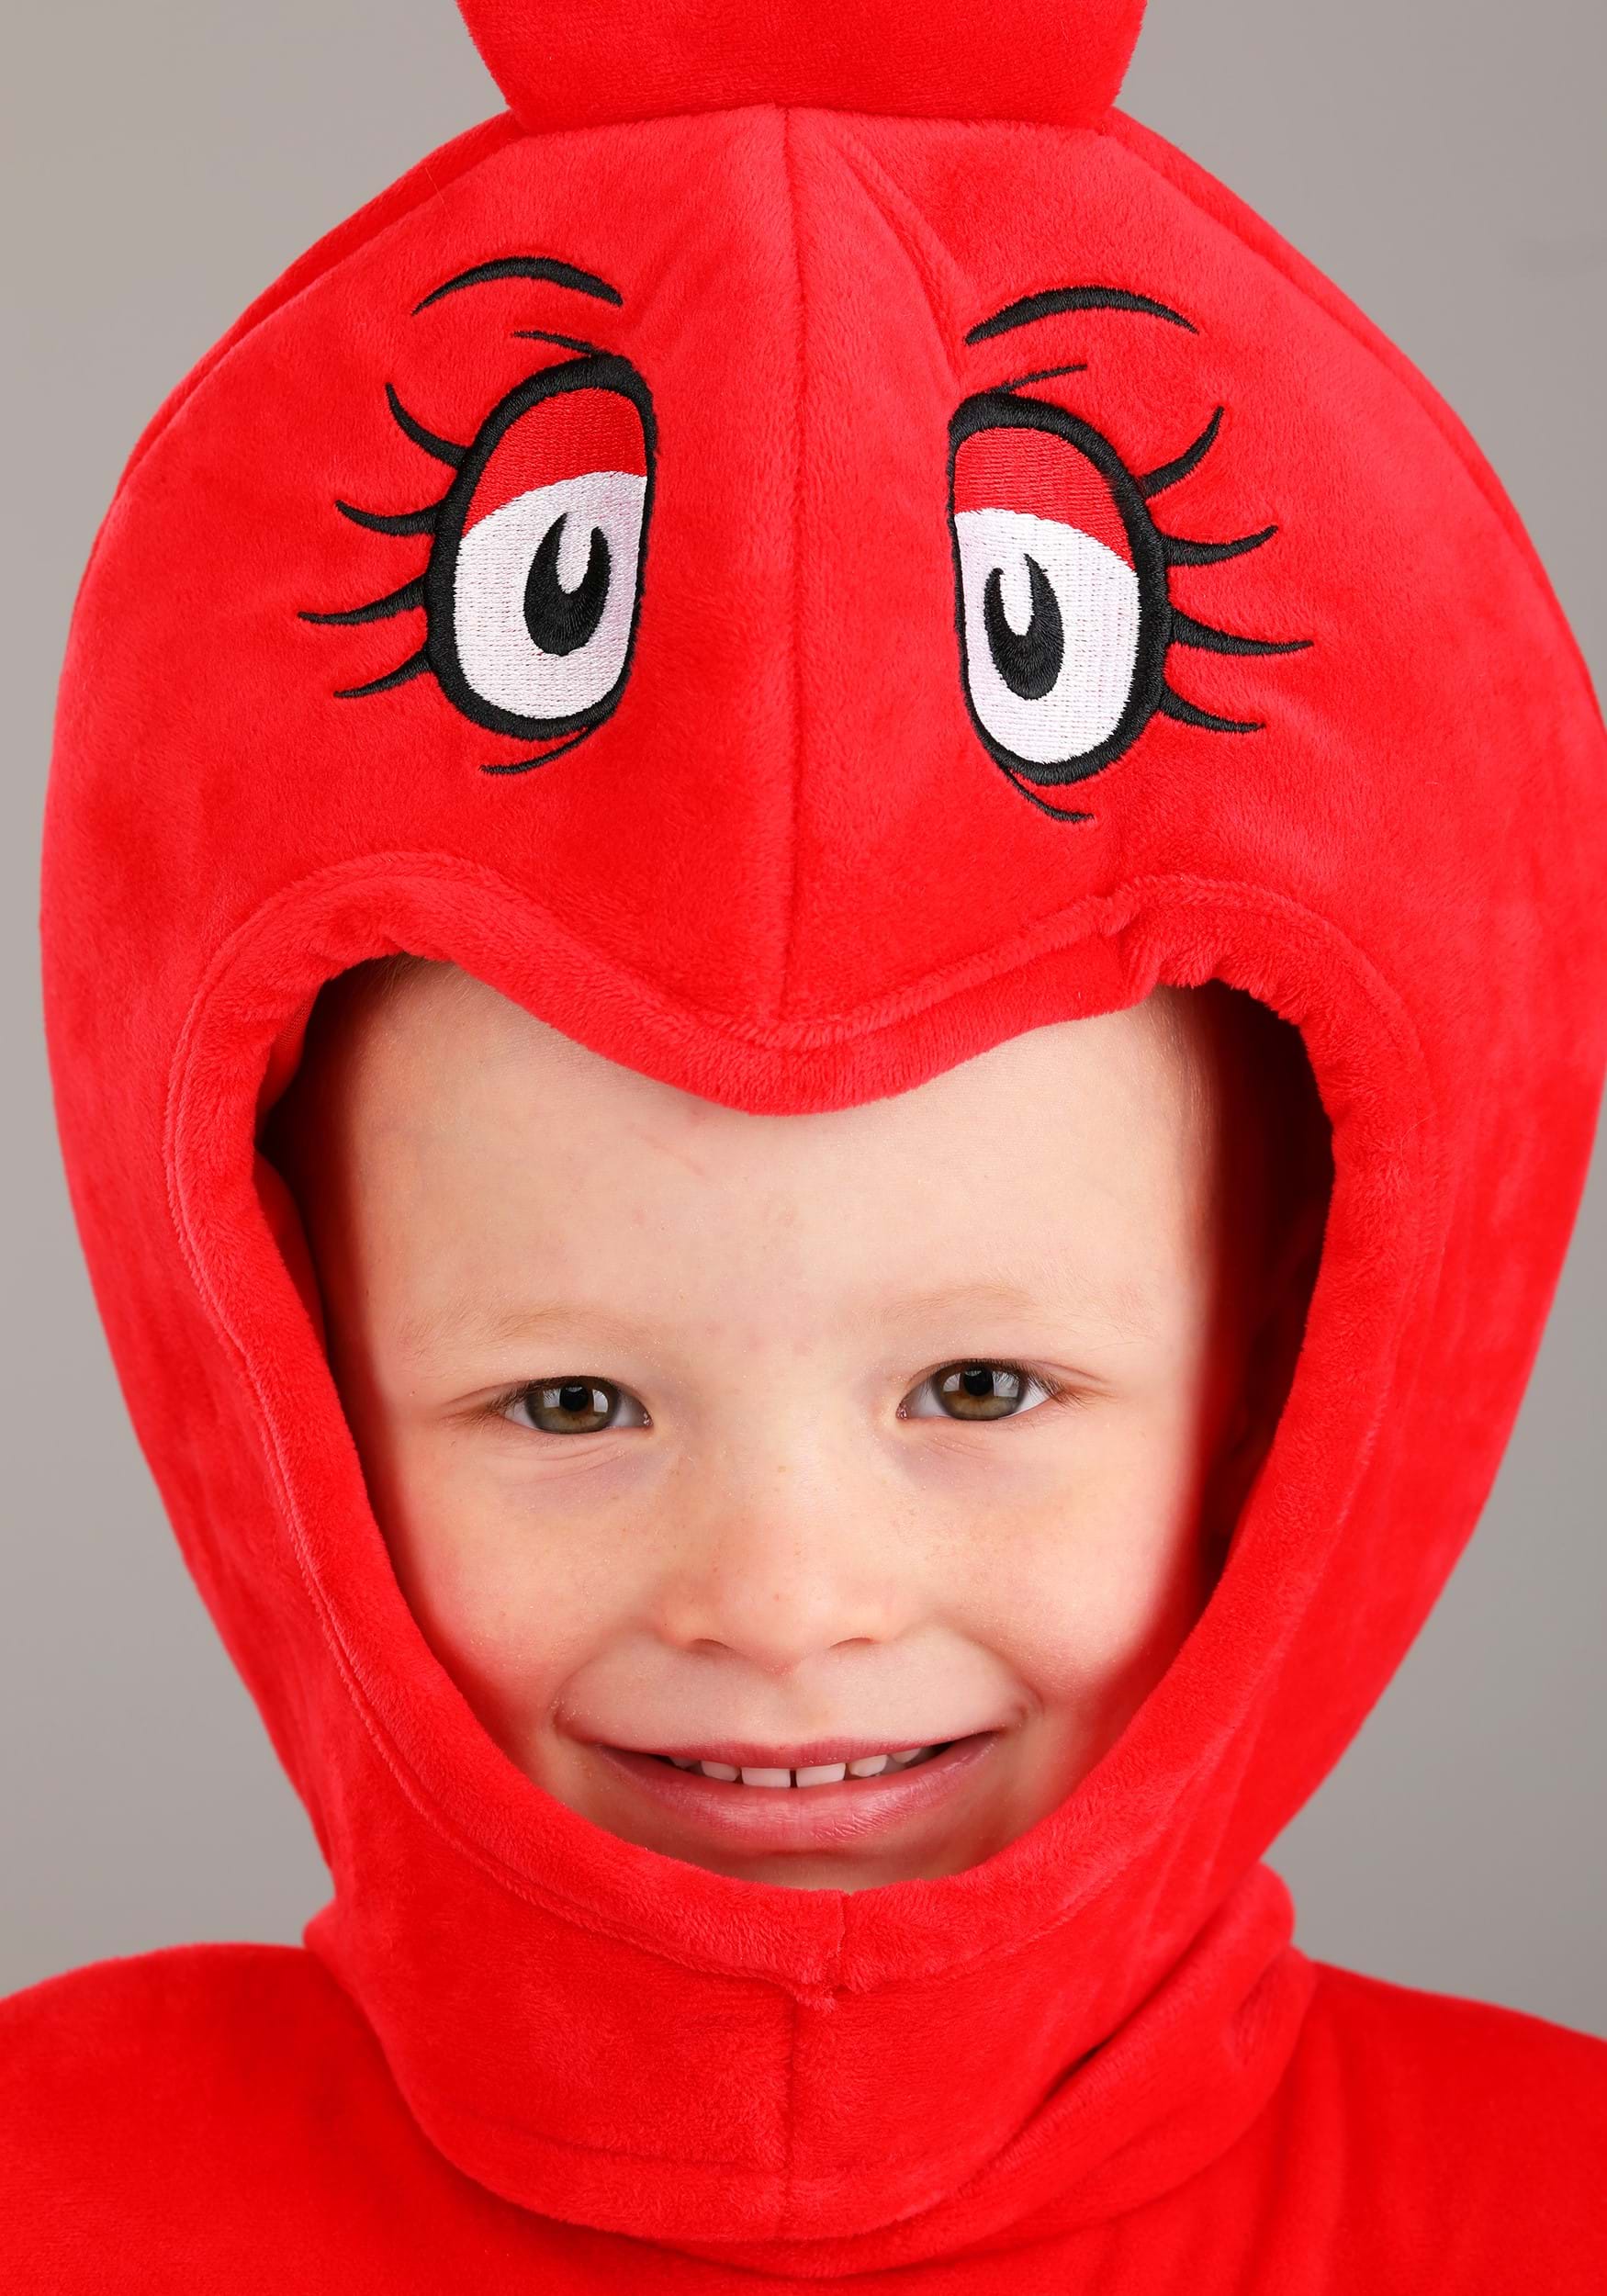 https://images.fun.com/products/78420/2-1-230080/dr-seuss-toddler-red-fish-costume-alt-3.jpg